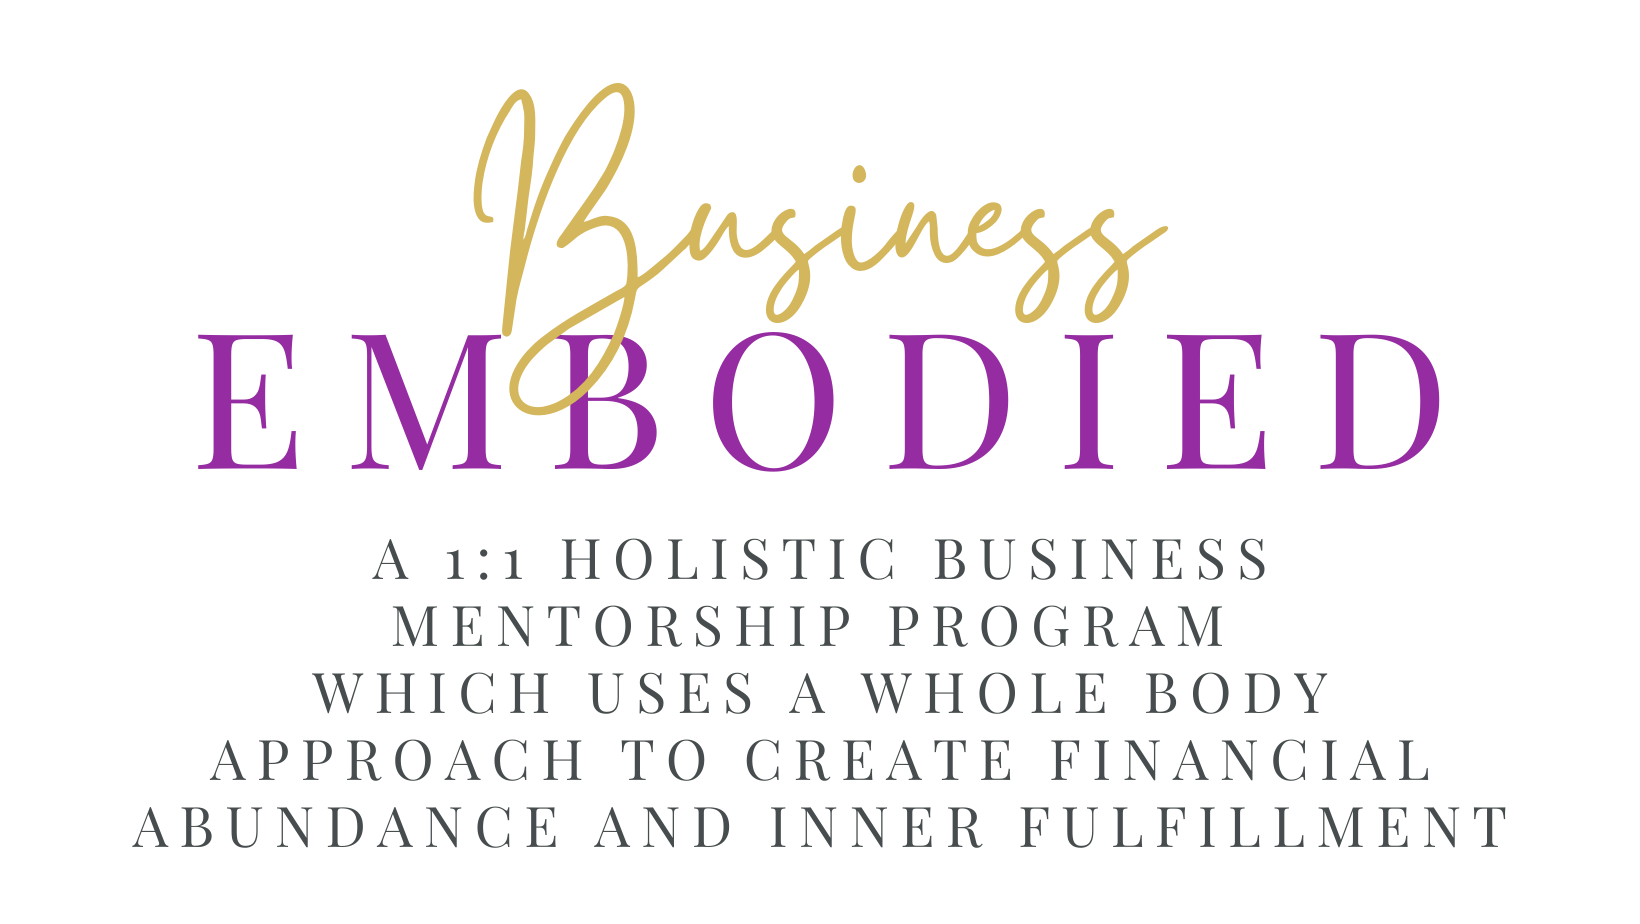 A High Touch 1 - 1 Holistic Business Mentorship Program which Uses A Whole Body Approach To Create Success and Fulfillment